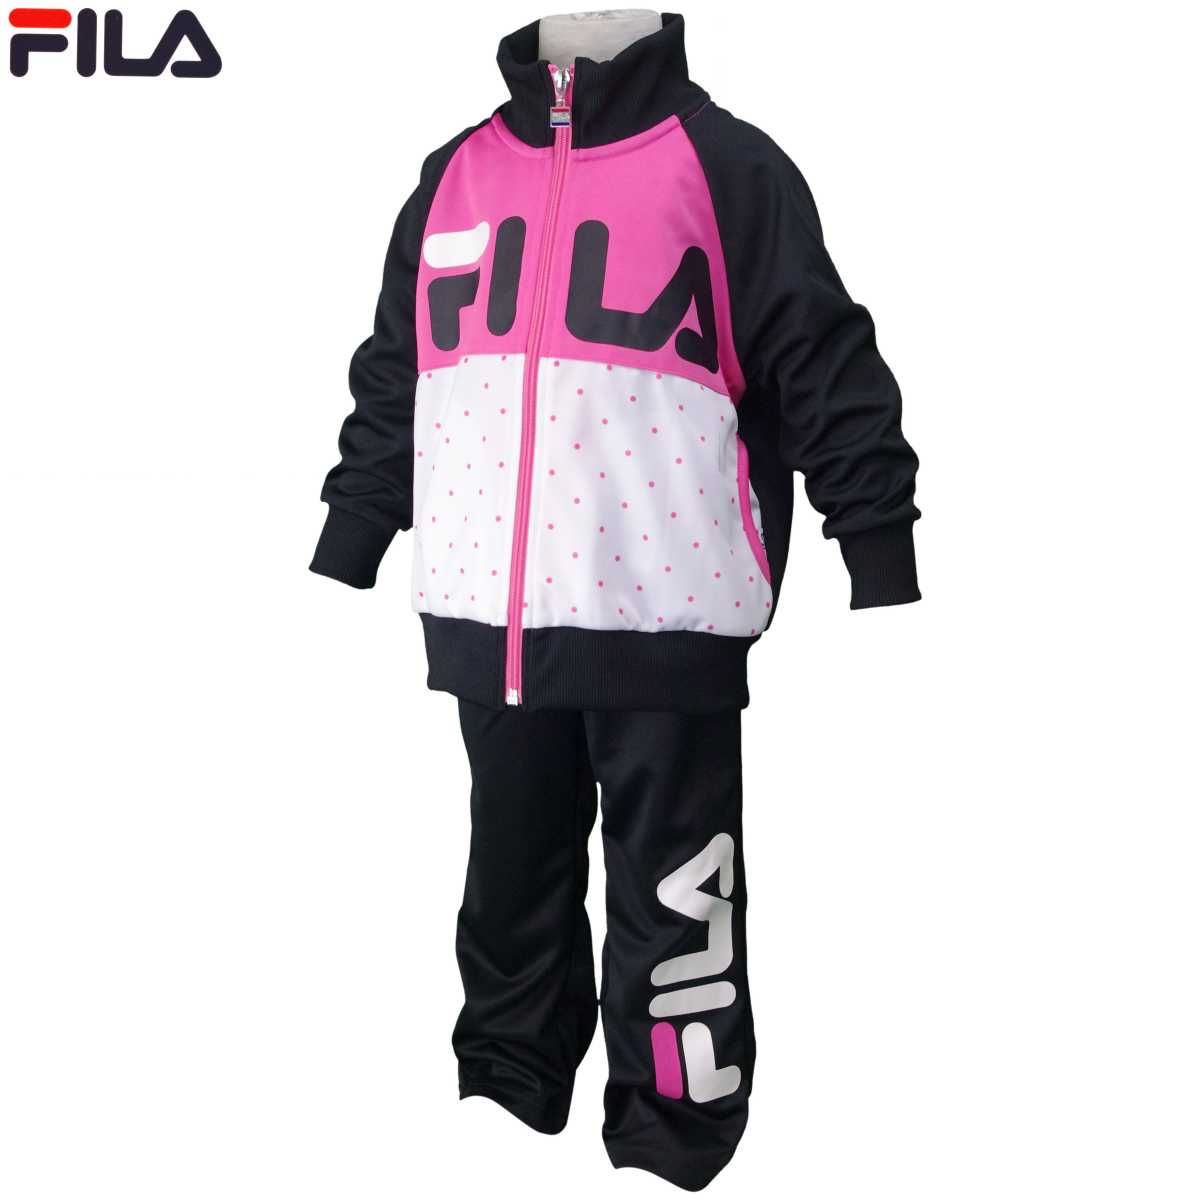 fila sweatsuit for toddlers